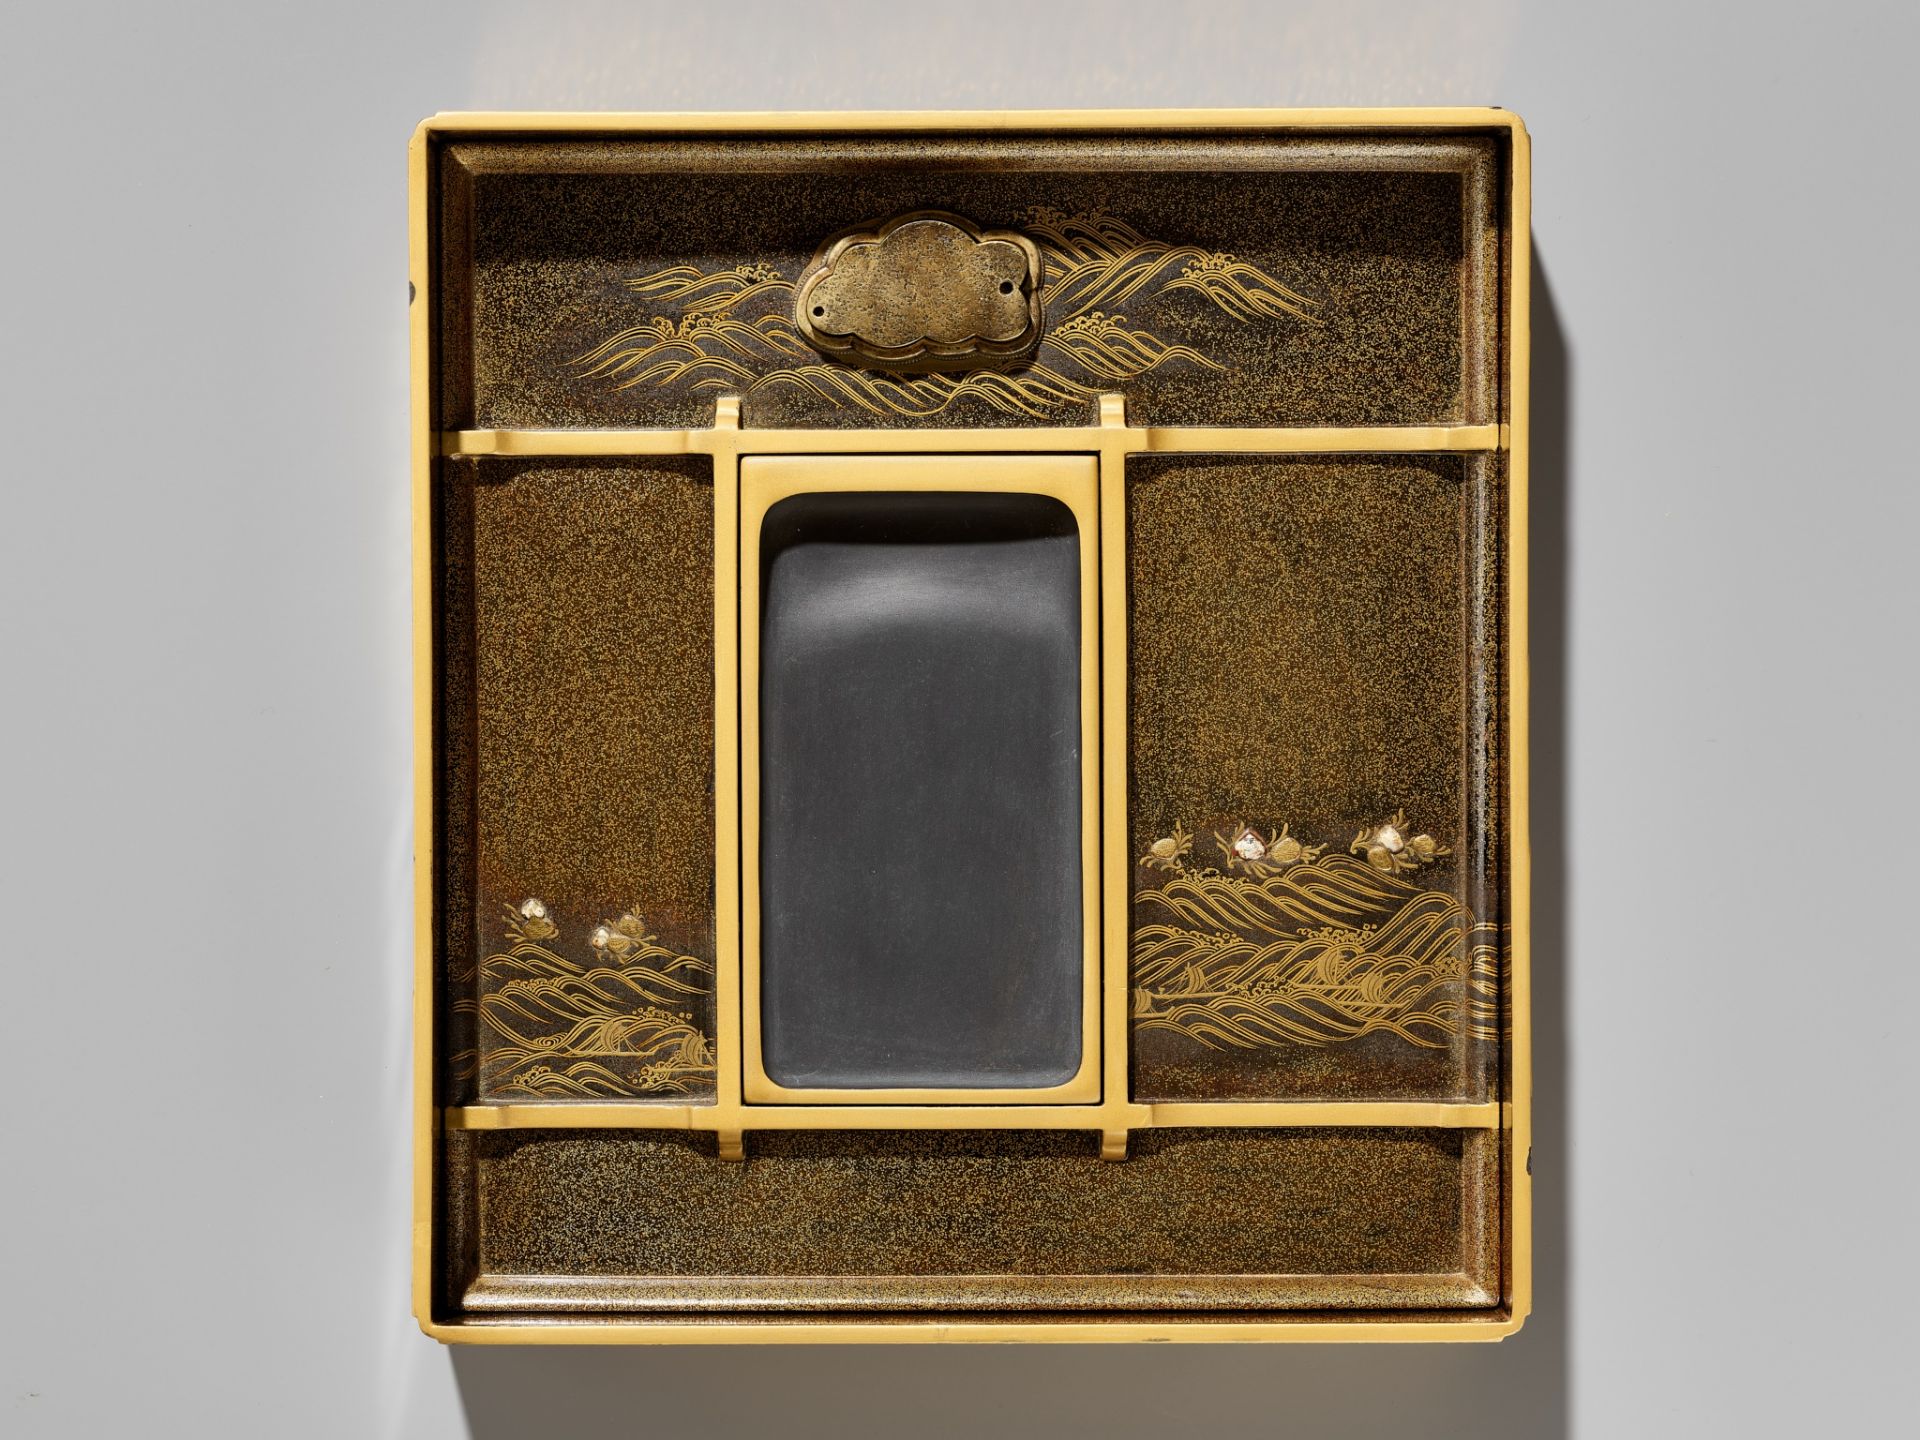 A SUPERB LACQUER SUZURIBAKO WITH A 'WATERWHEEL' MERCURY MECHANISM - Image 8 of 17